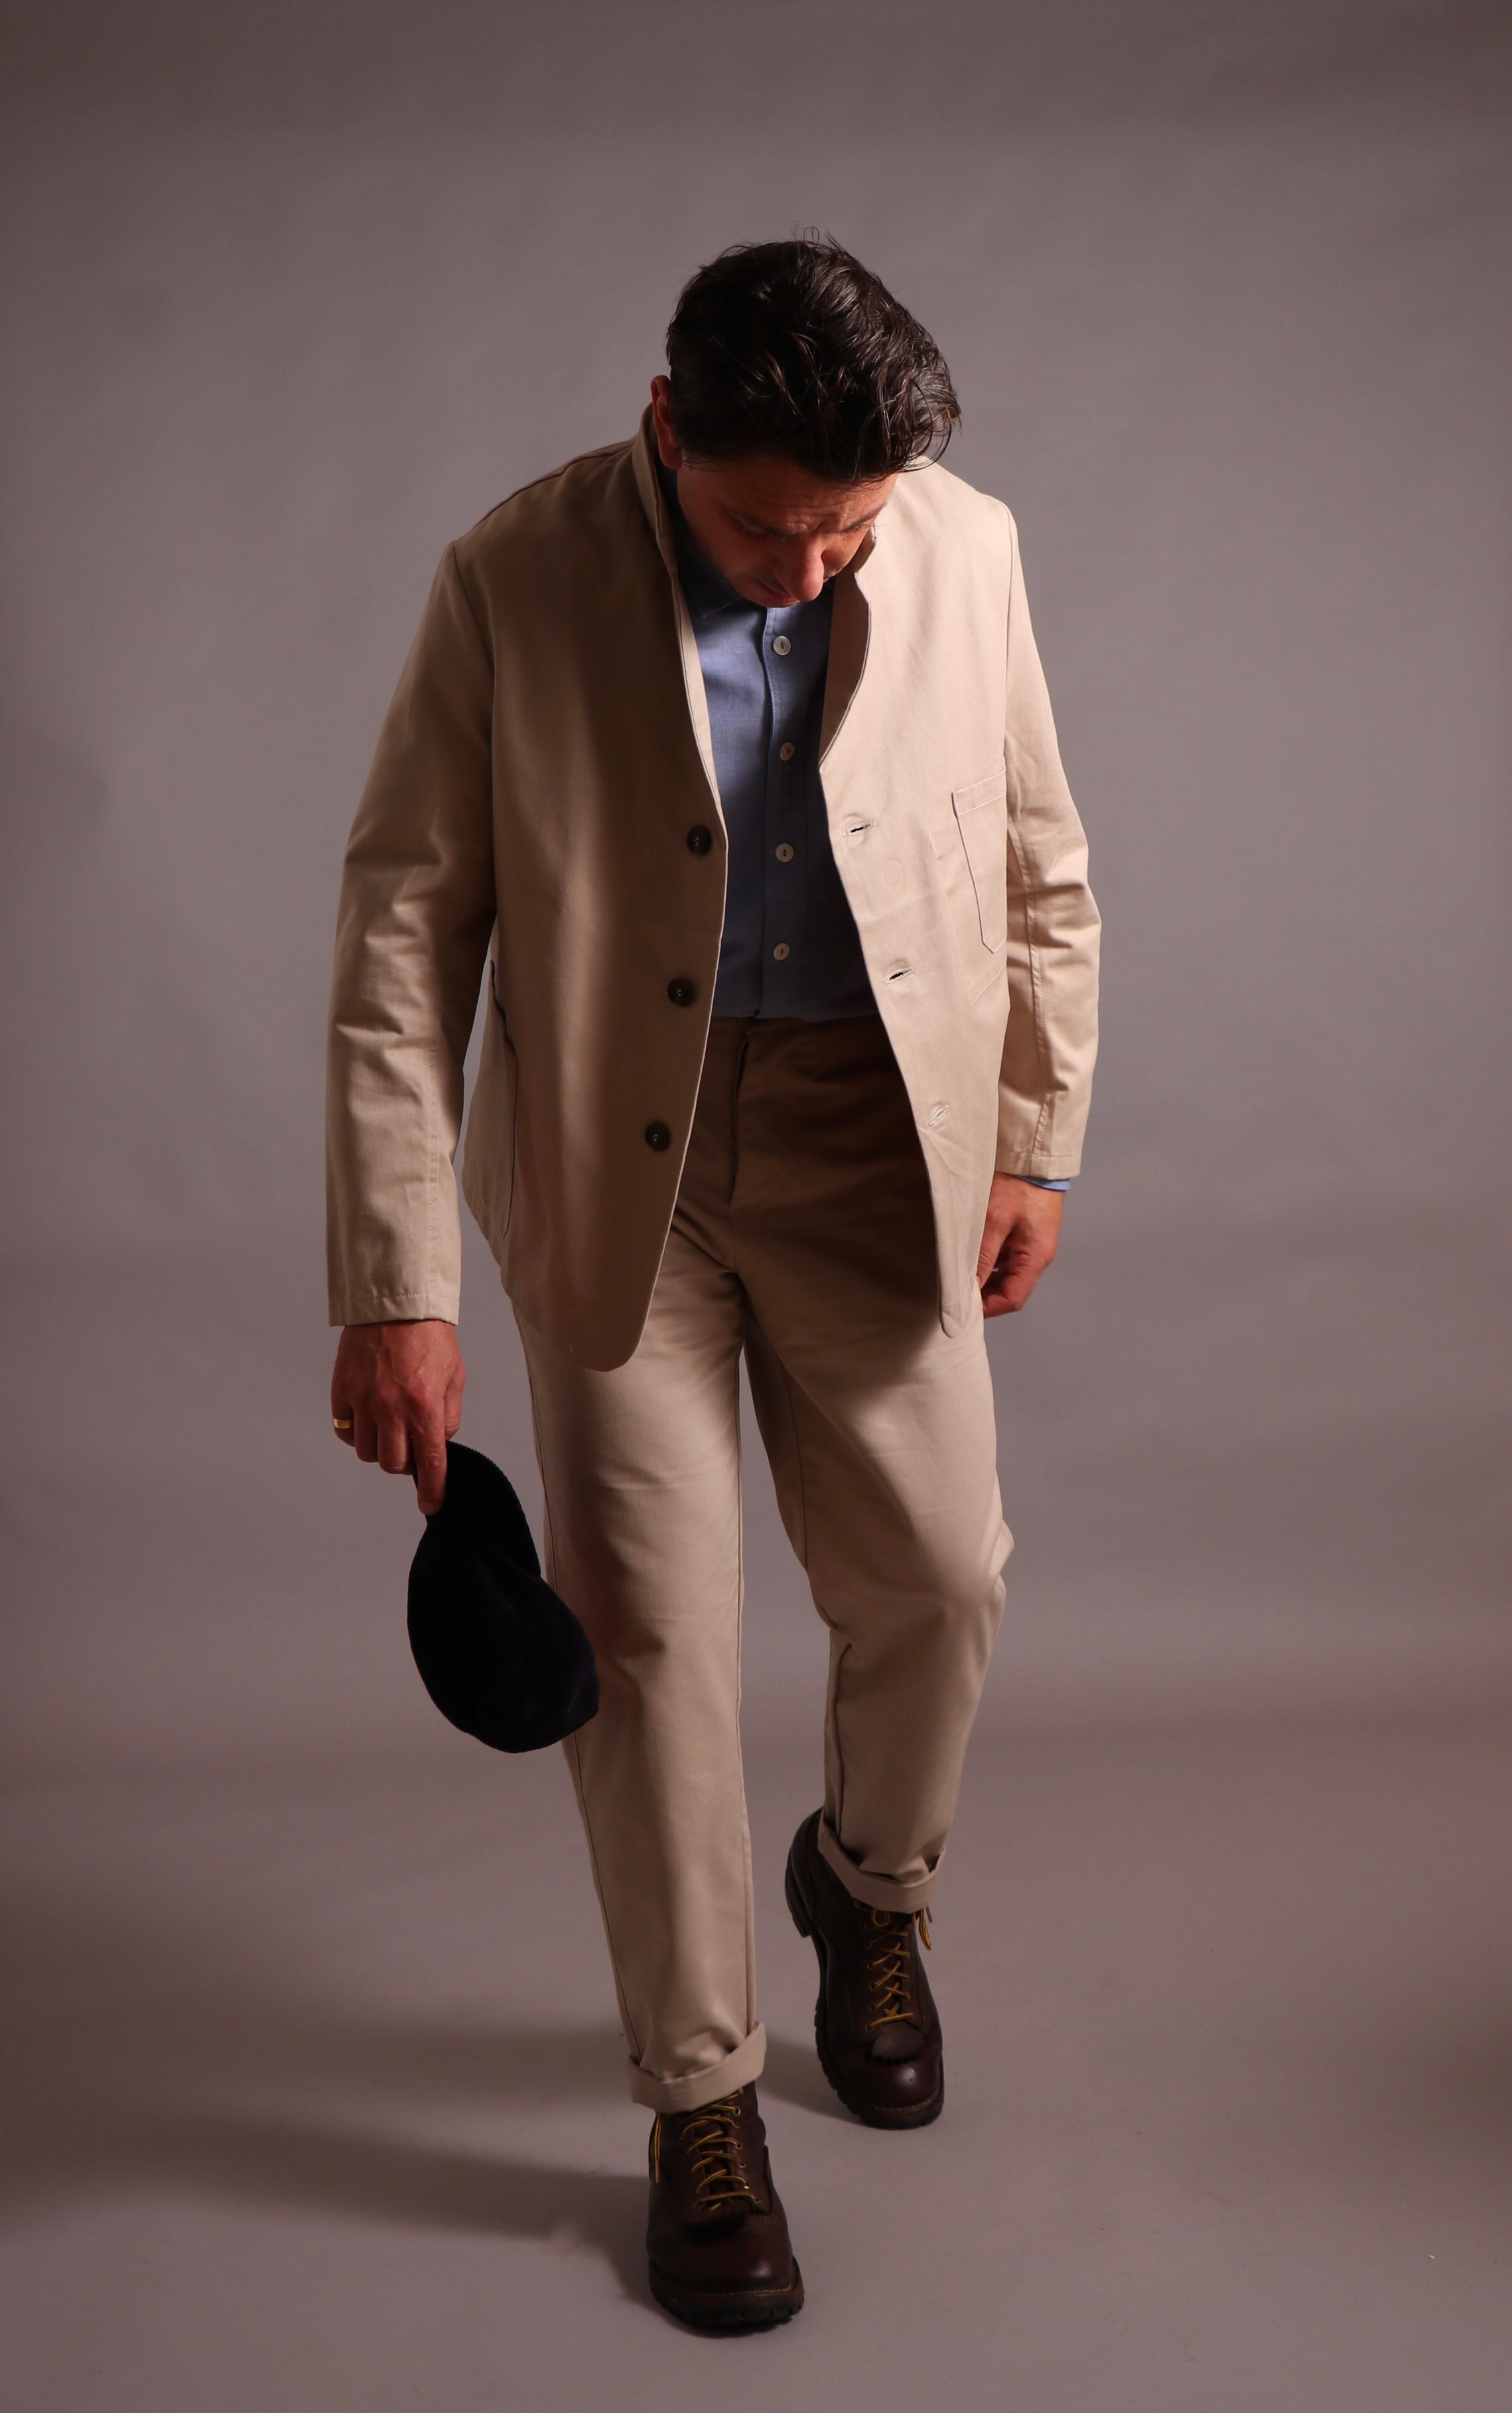 Enzo wears High Waist Trousers with Three Button Jacket and Pinpoint Chambray Shirt